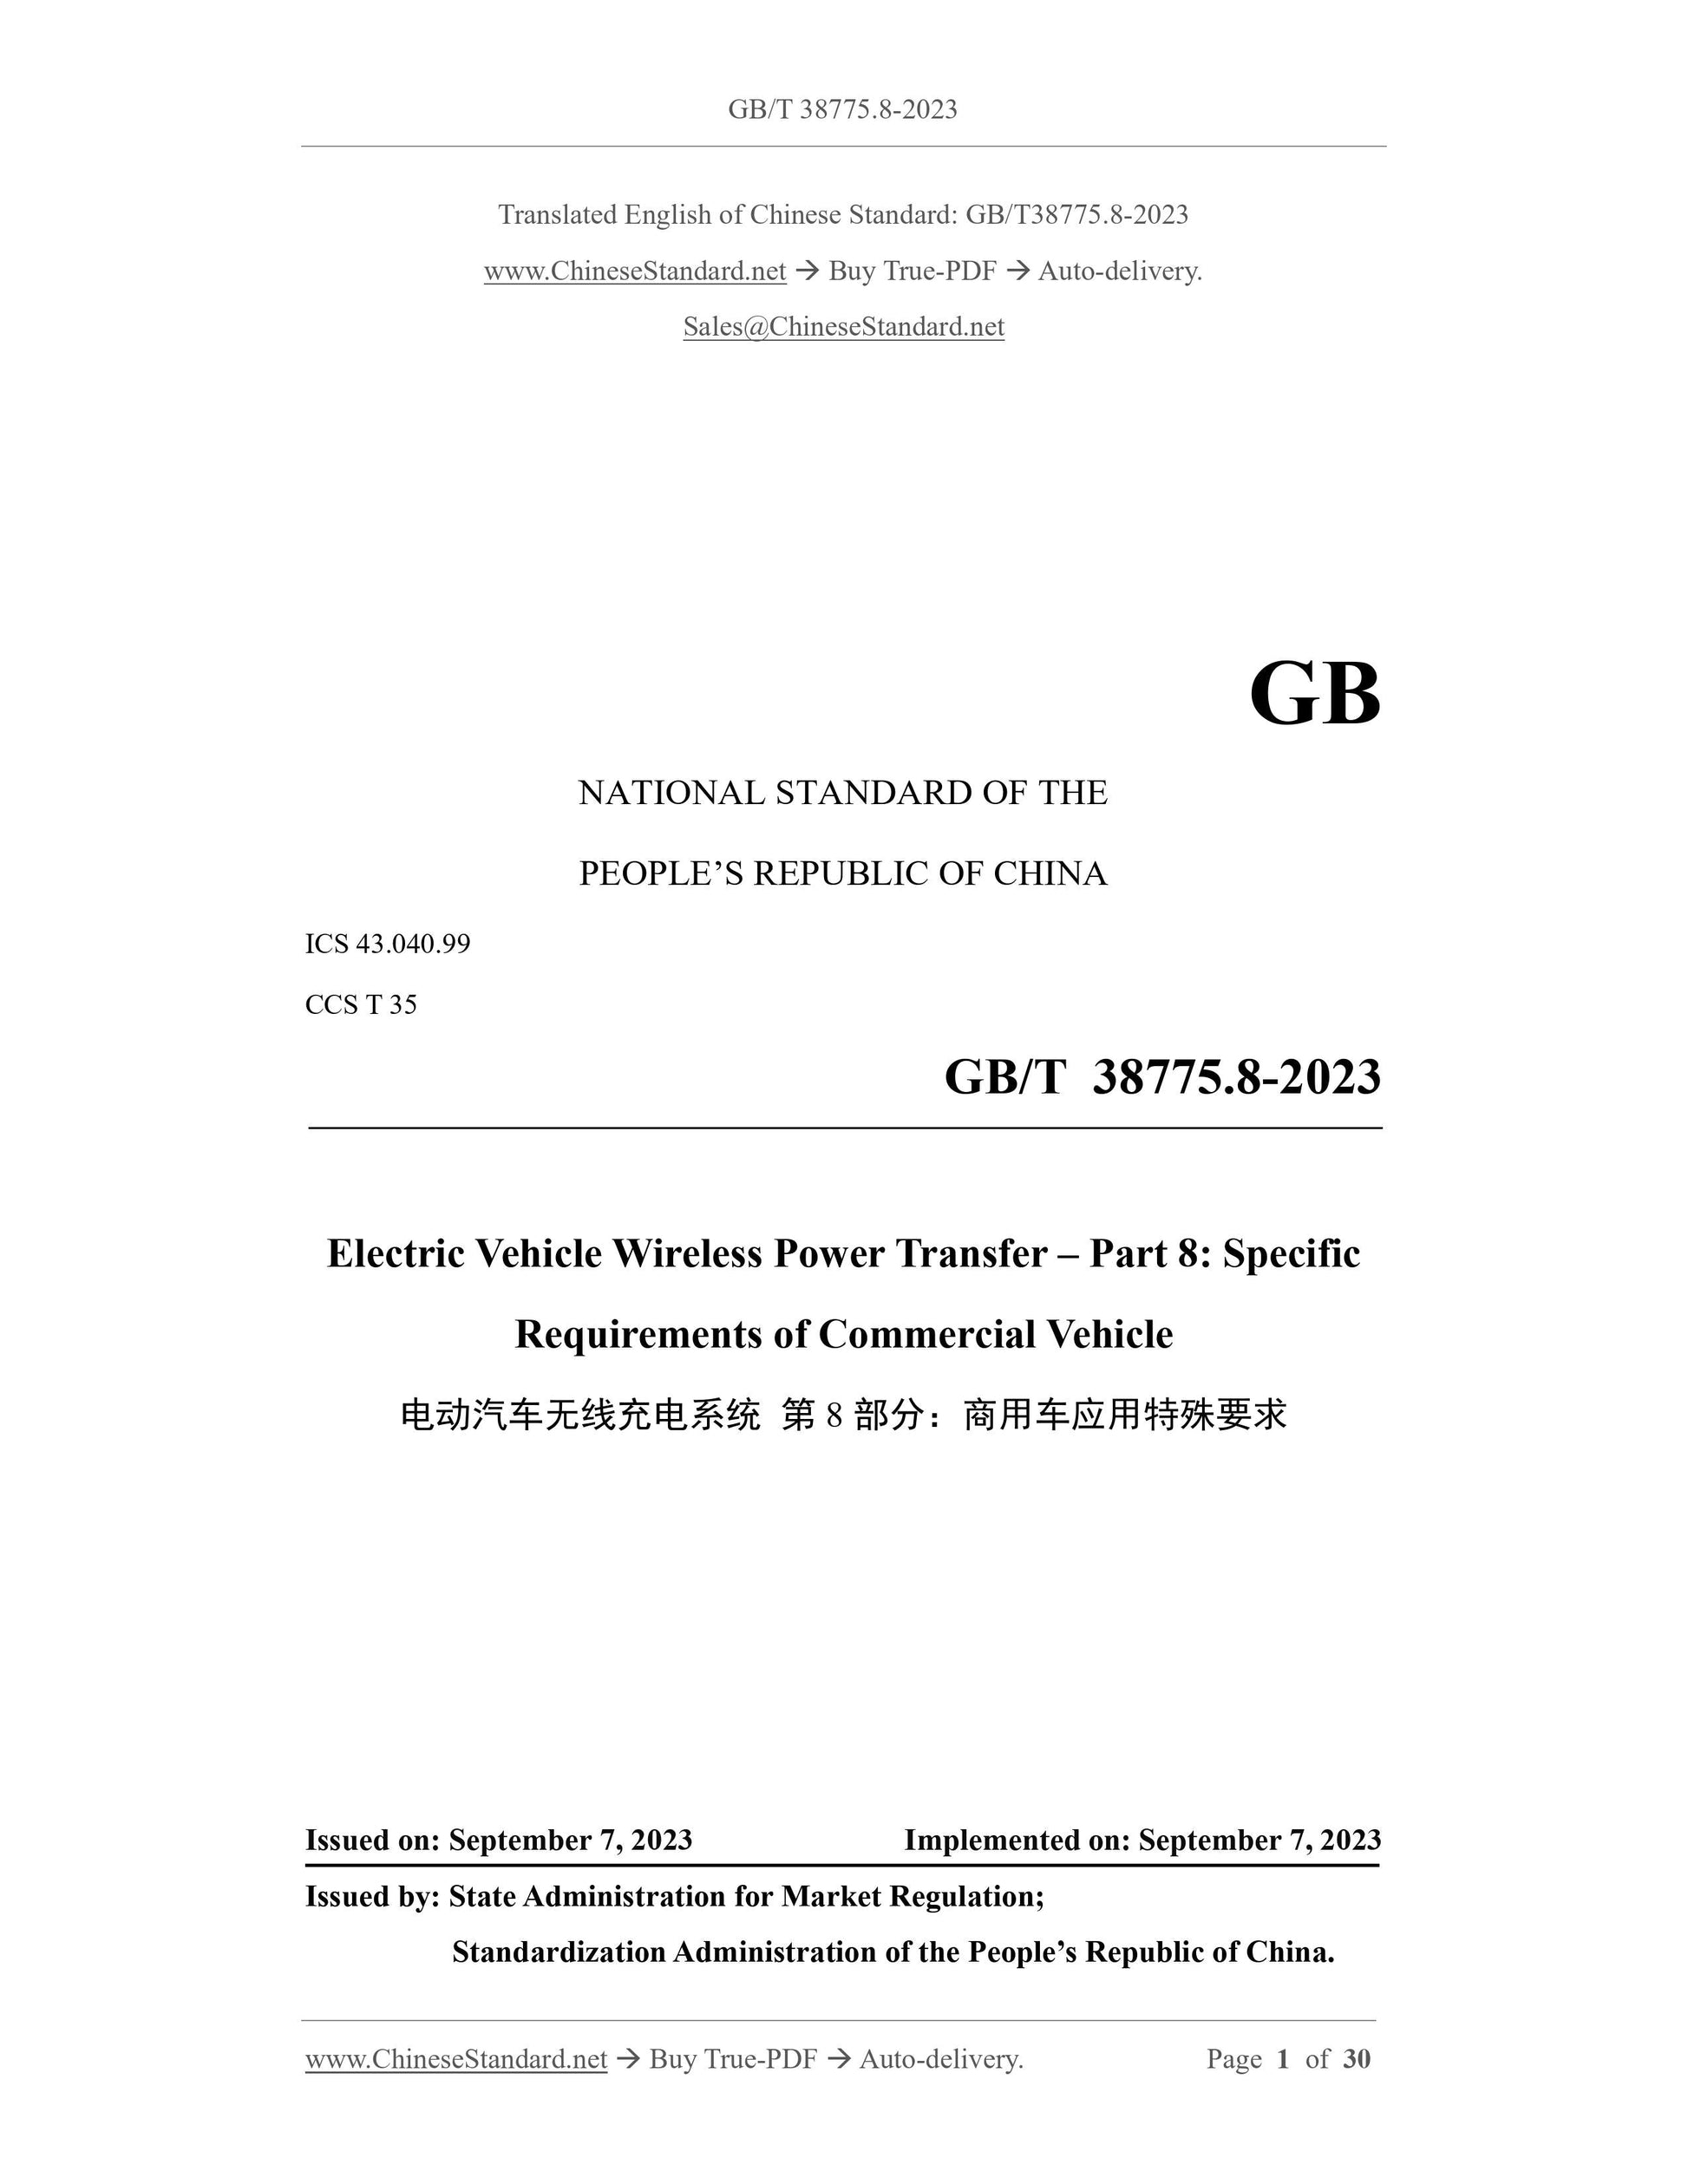 GB/T 38775.8-2023 Page 1